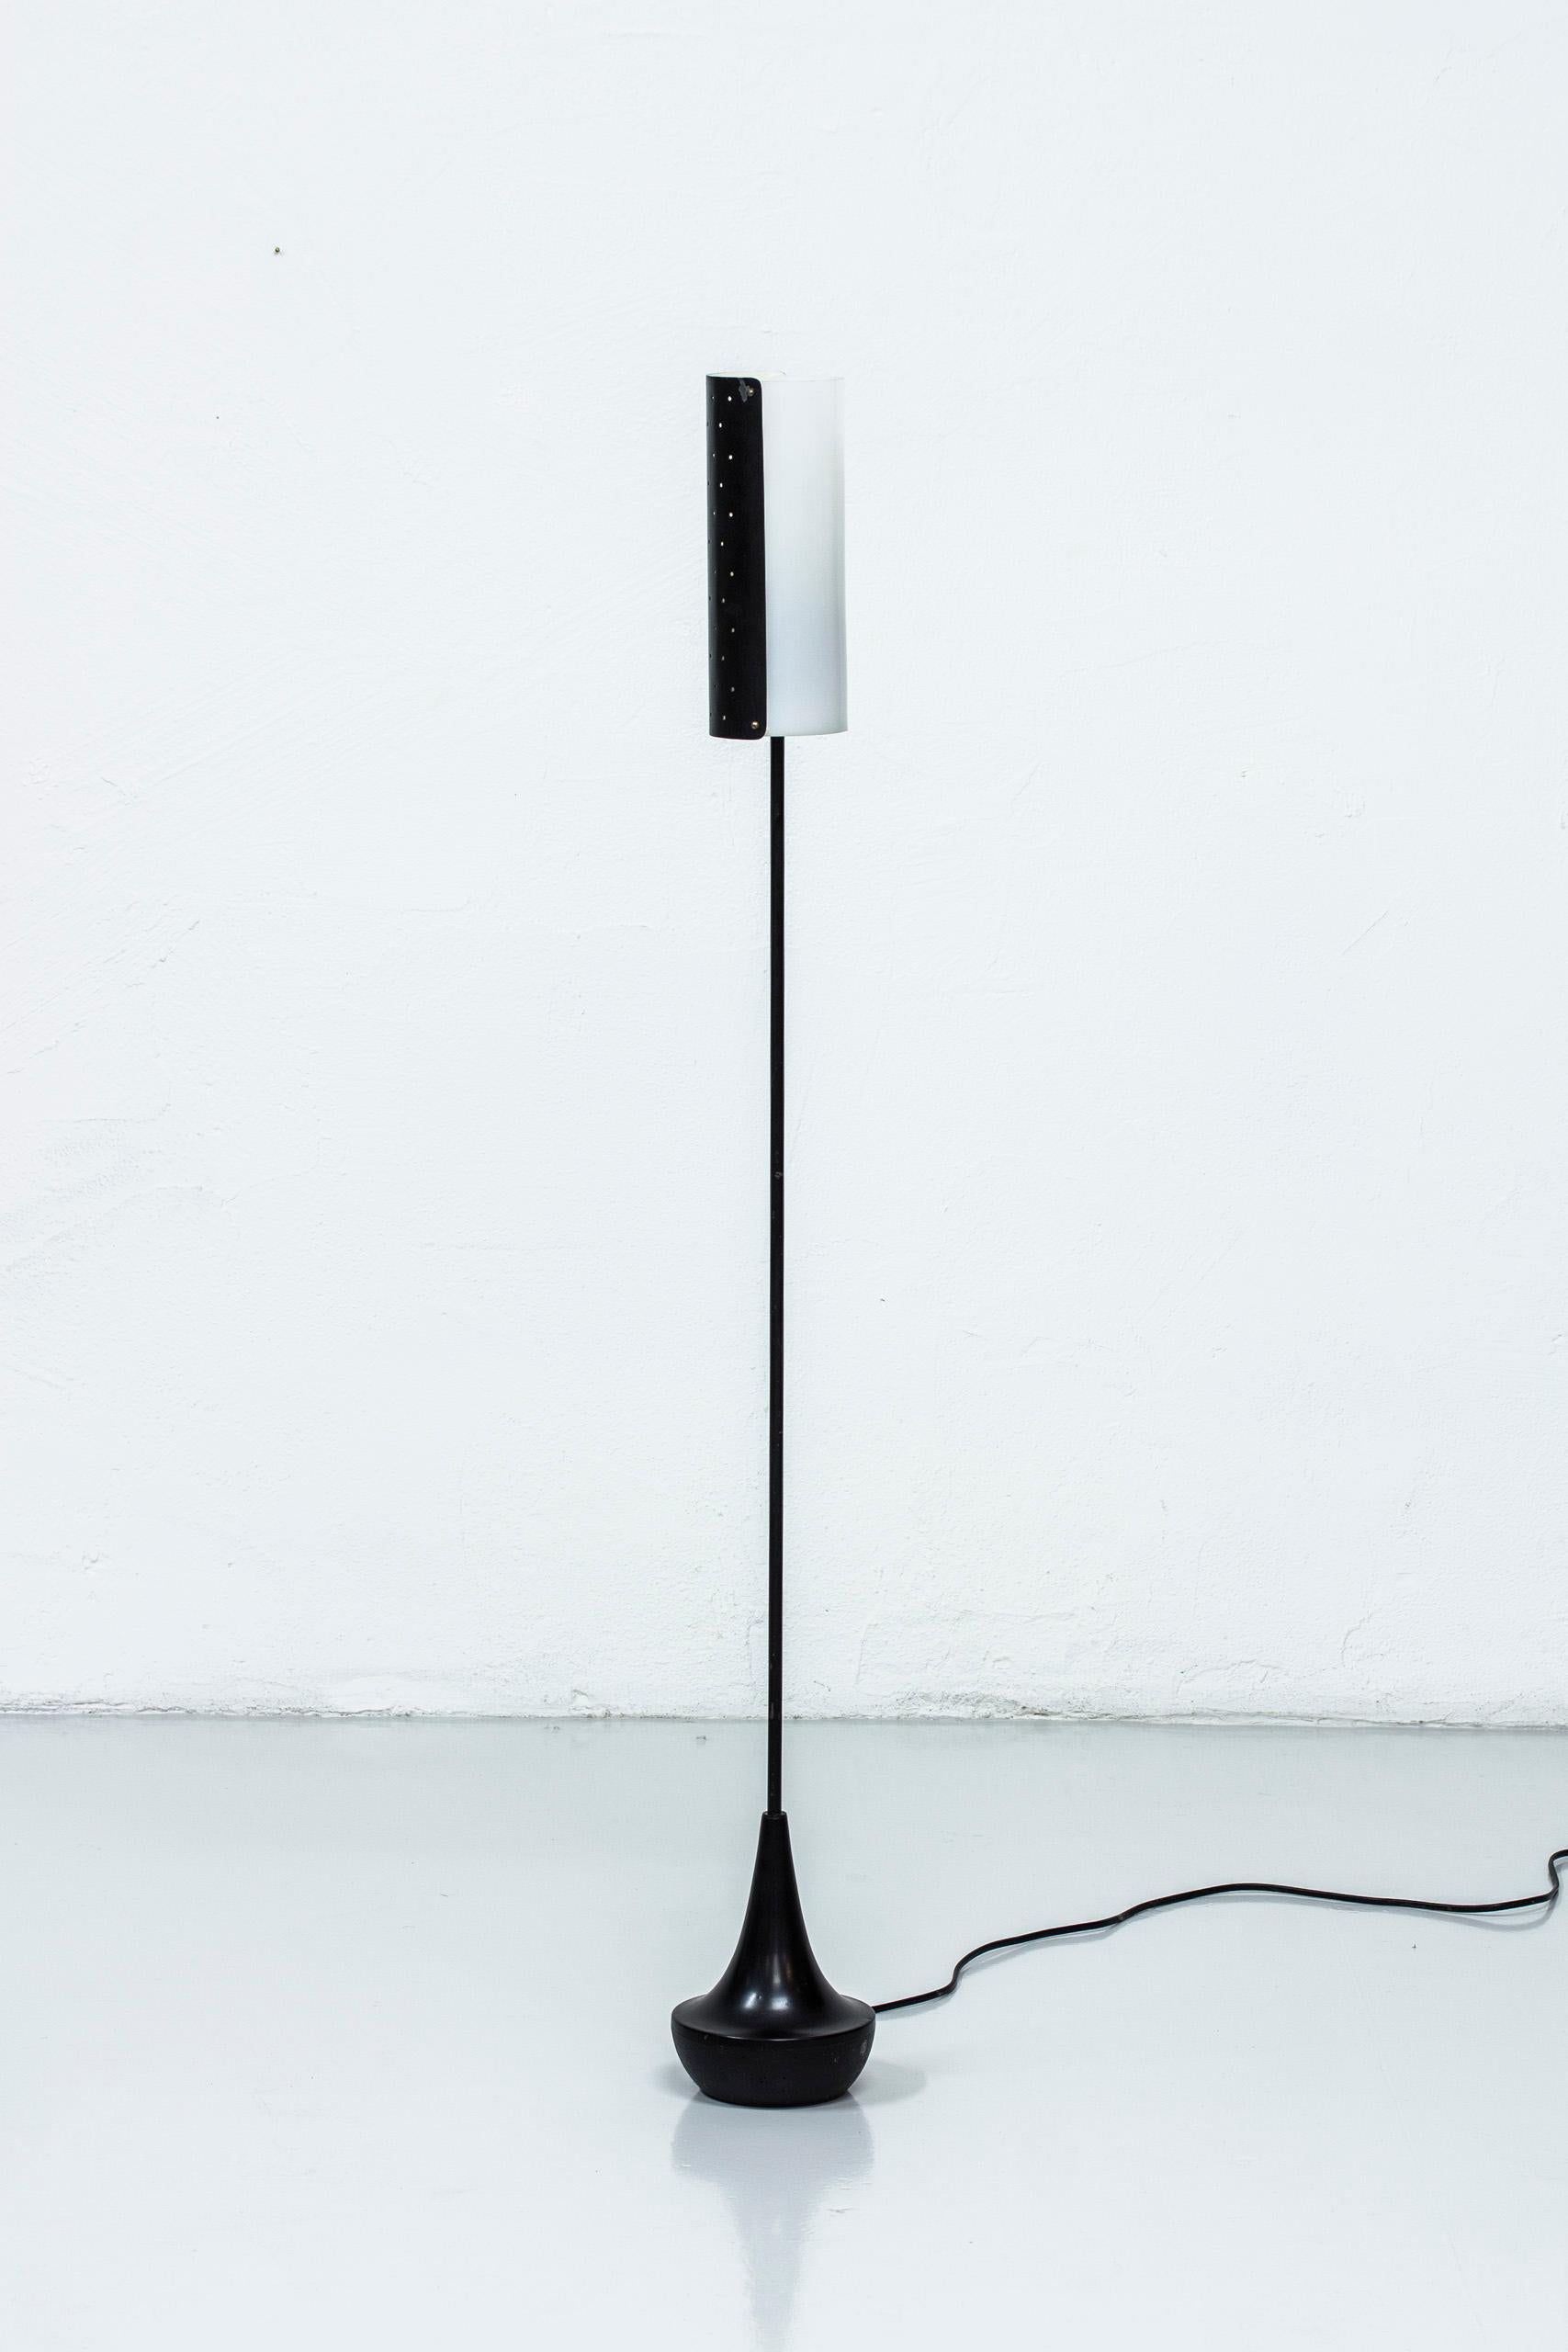 Floor lamp produced in Sweden by Karlskrona Lampfabrik. Made during the 1950s. Made from cast iron, metall and acrylic. New electric chord. Light switch on the chord. Very good vintage condition with signs of age and wear.